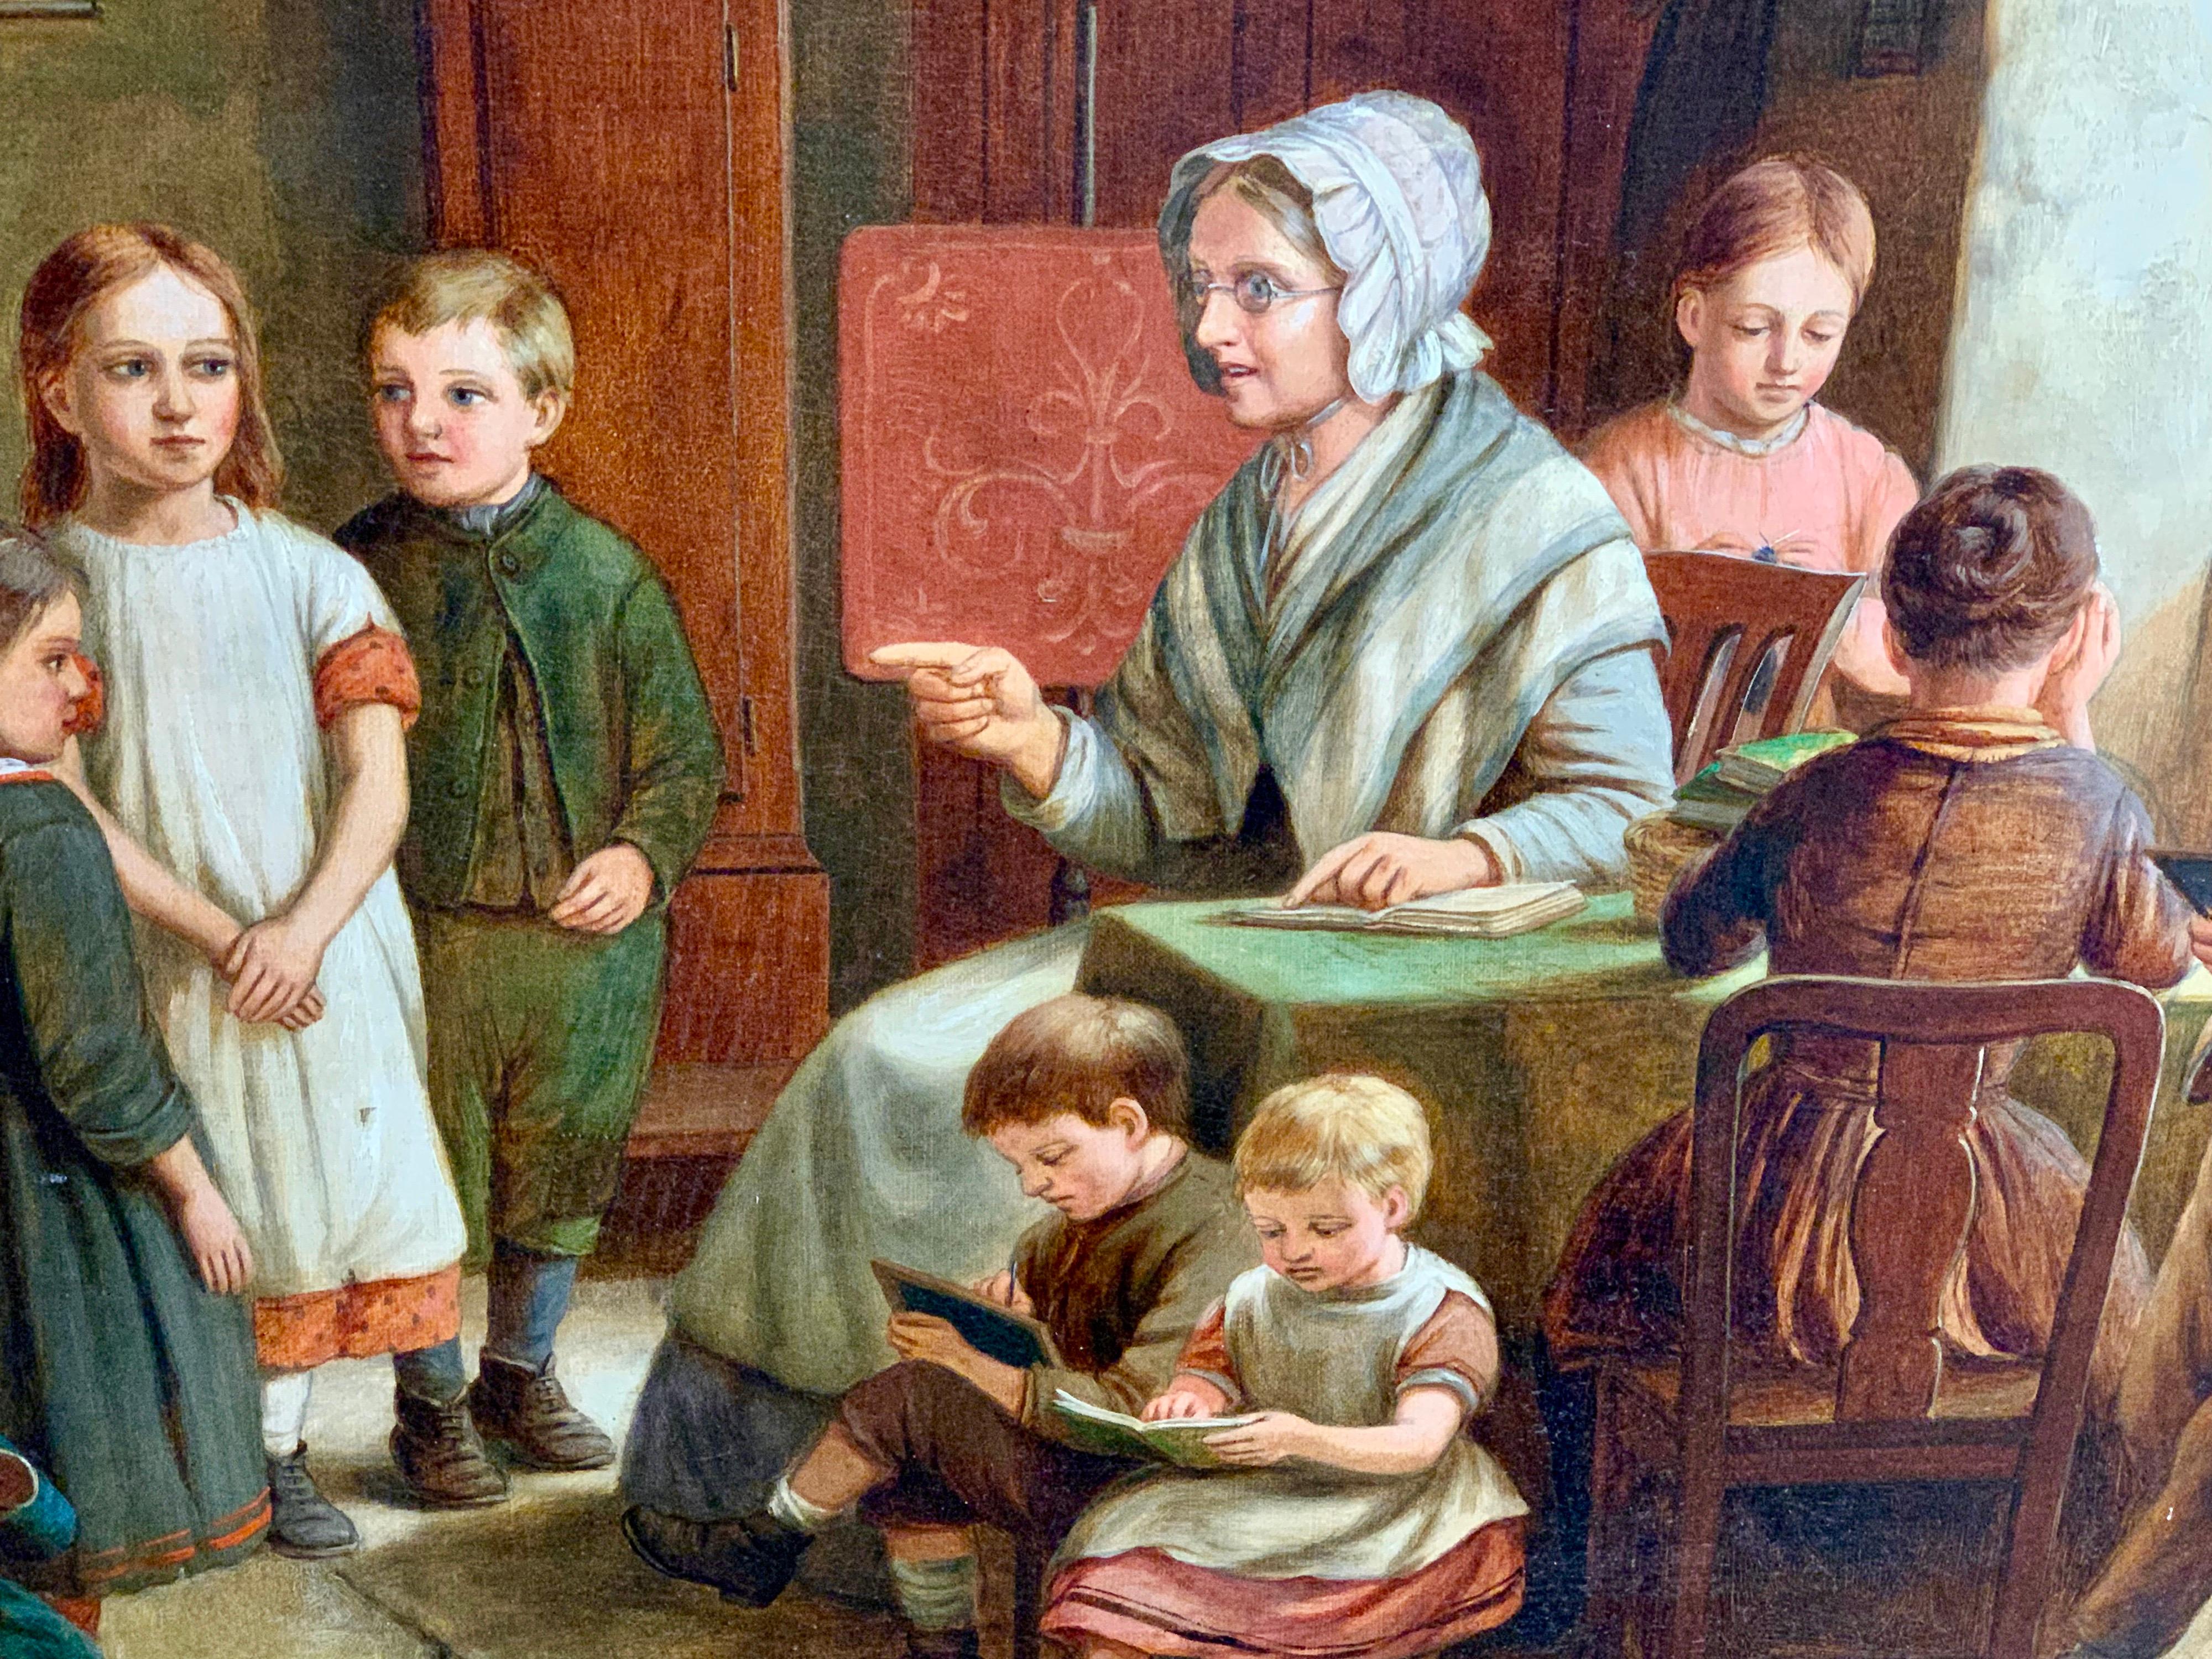 A wonderful 19th century English painting depicting an English dame school in the 19th century.

William Bromley (1818-1888), was the grandson of the famous engraver William Bromley and initially worked as an engraver himself but soon turned to